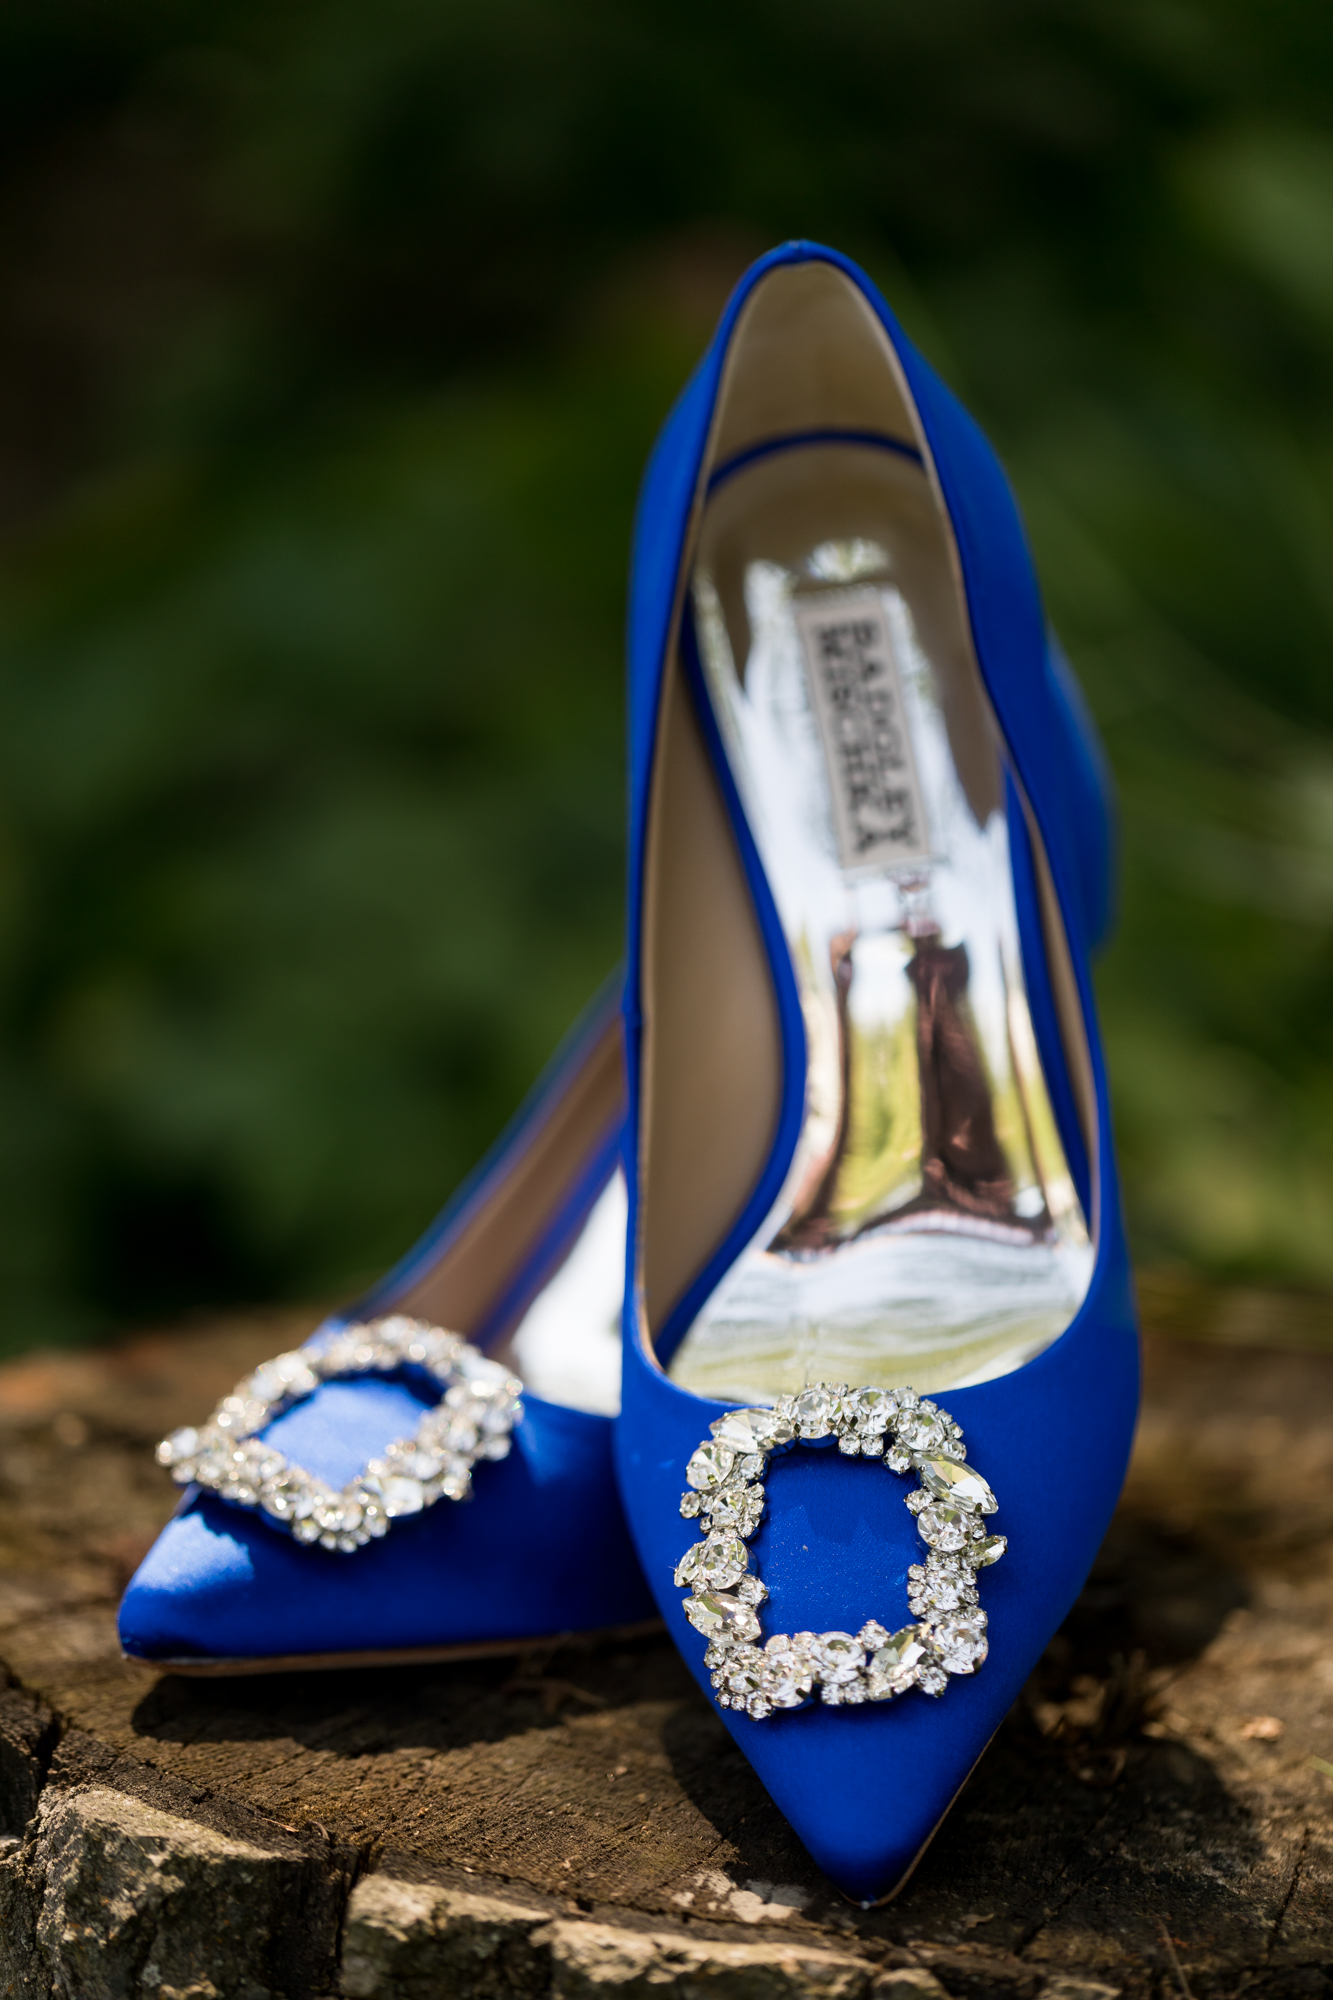 Bride's shoes on the wedding day